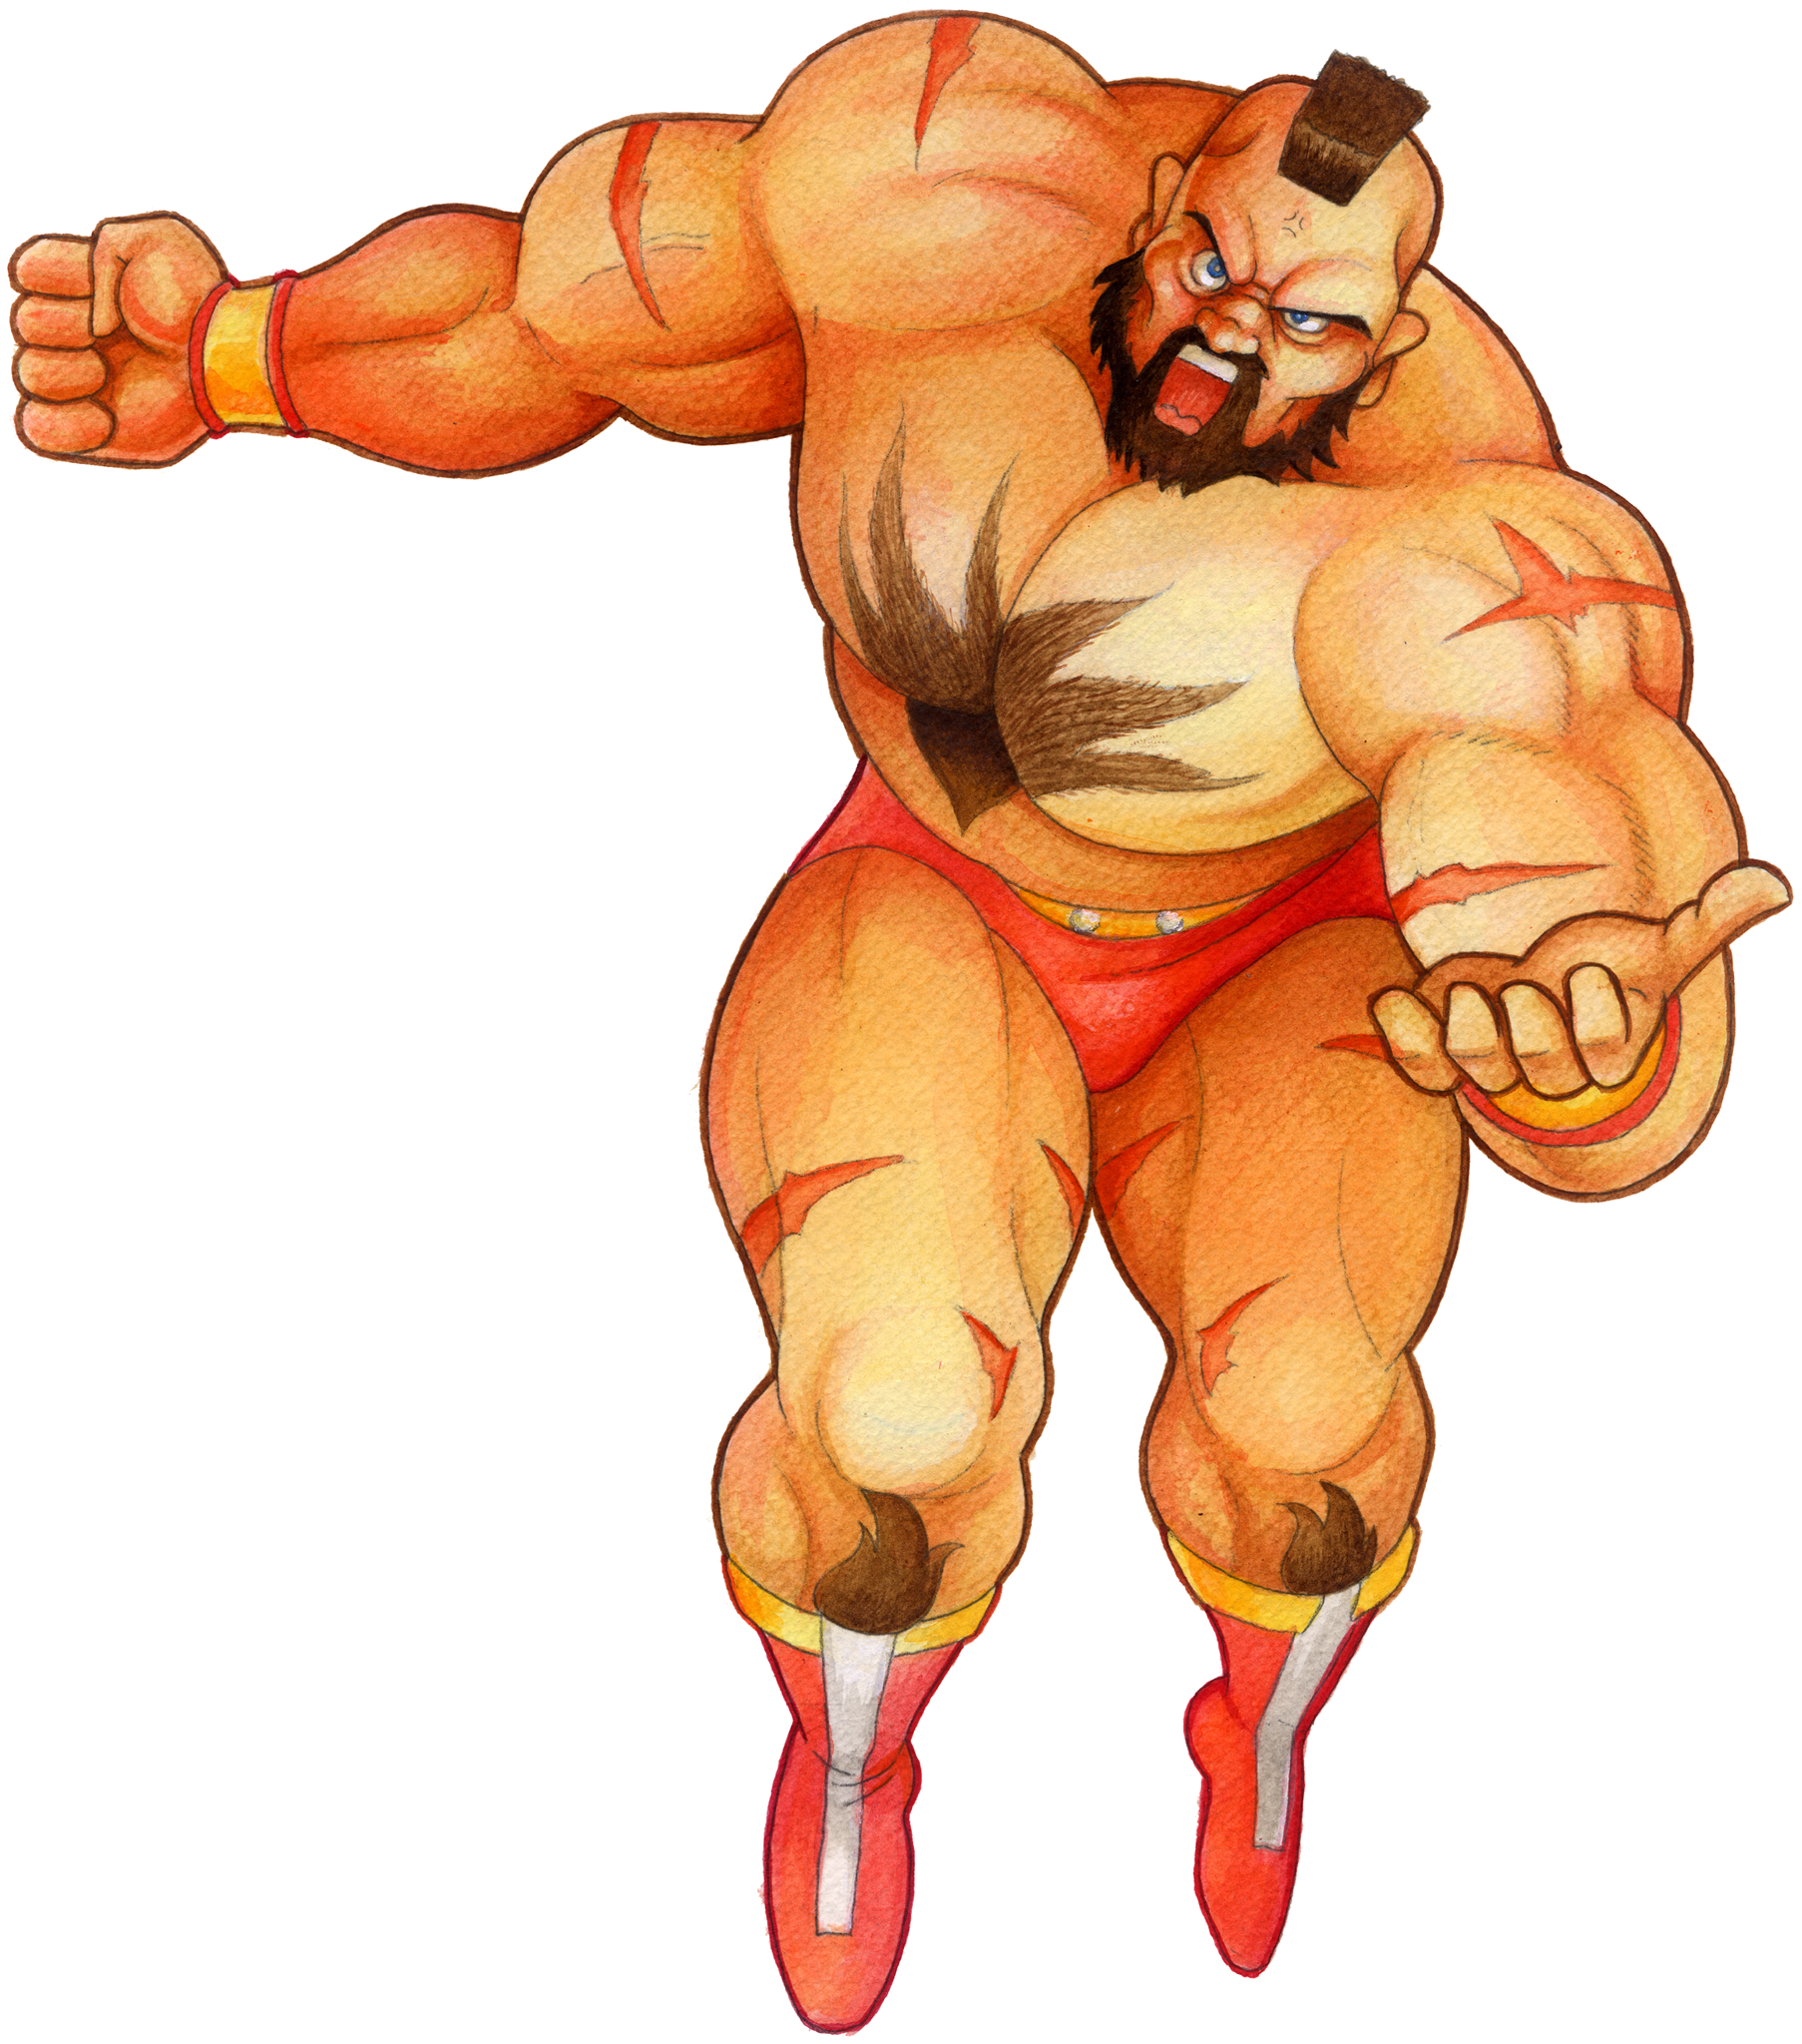 Zangief Street Fighter Encyclopedia Profile by edwinhuang on